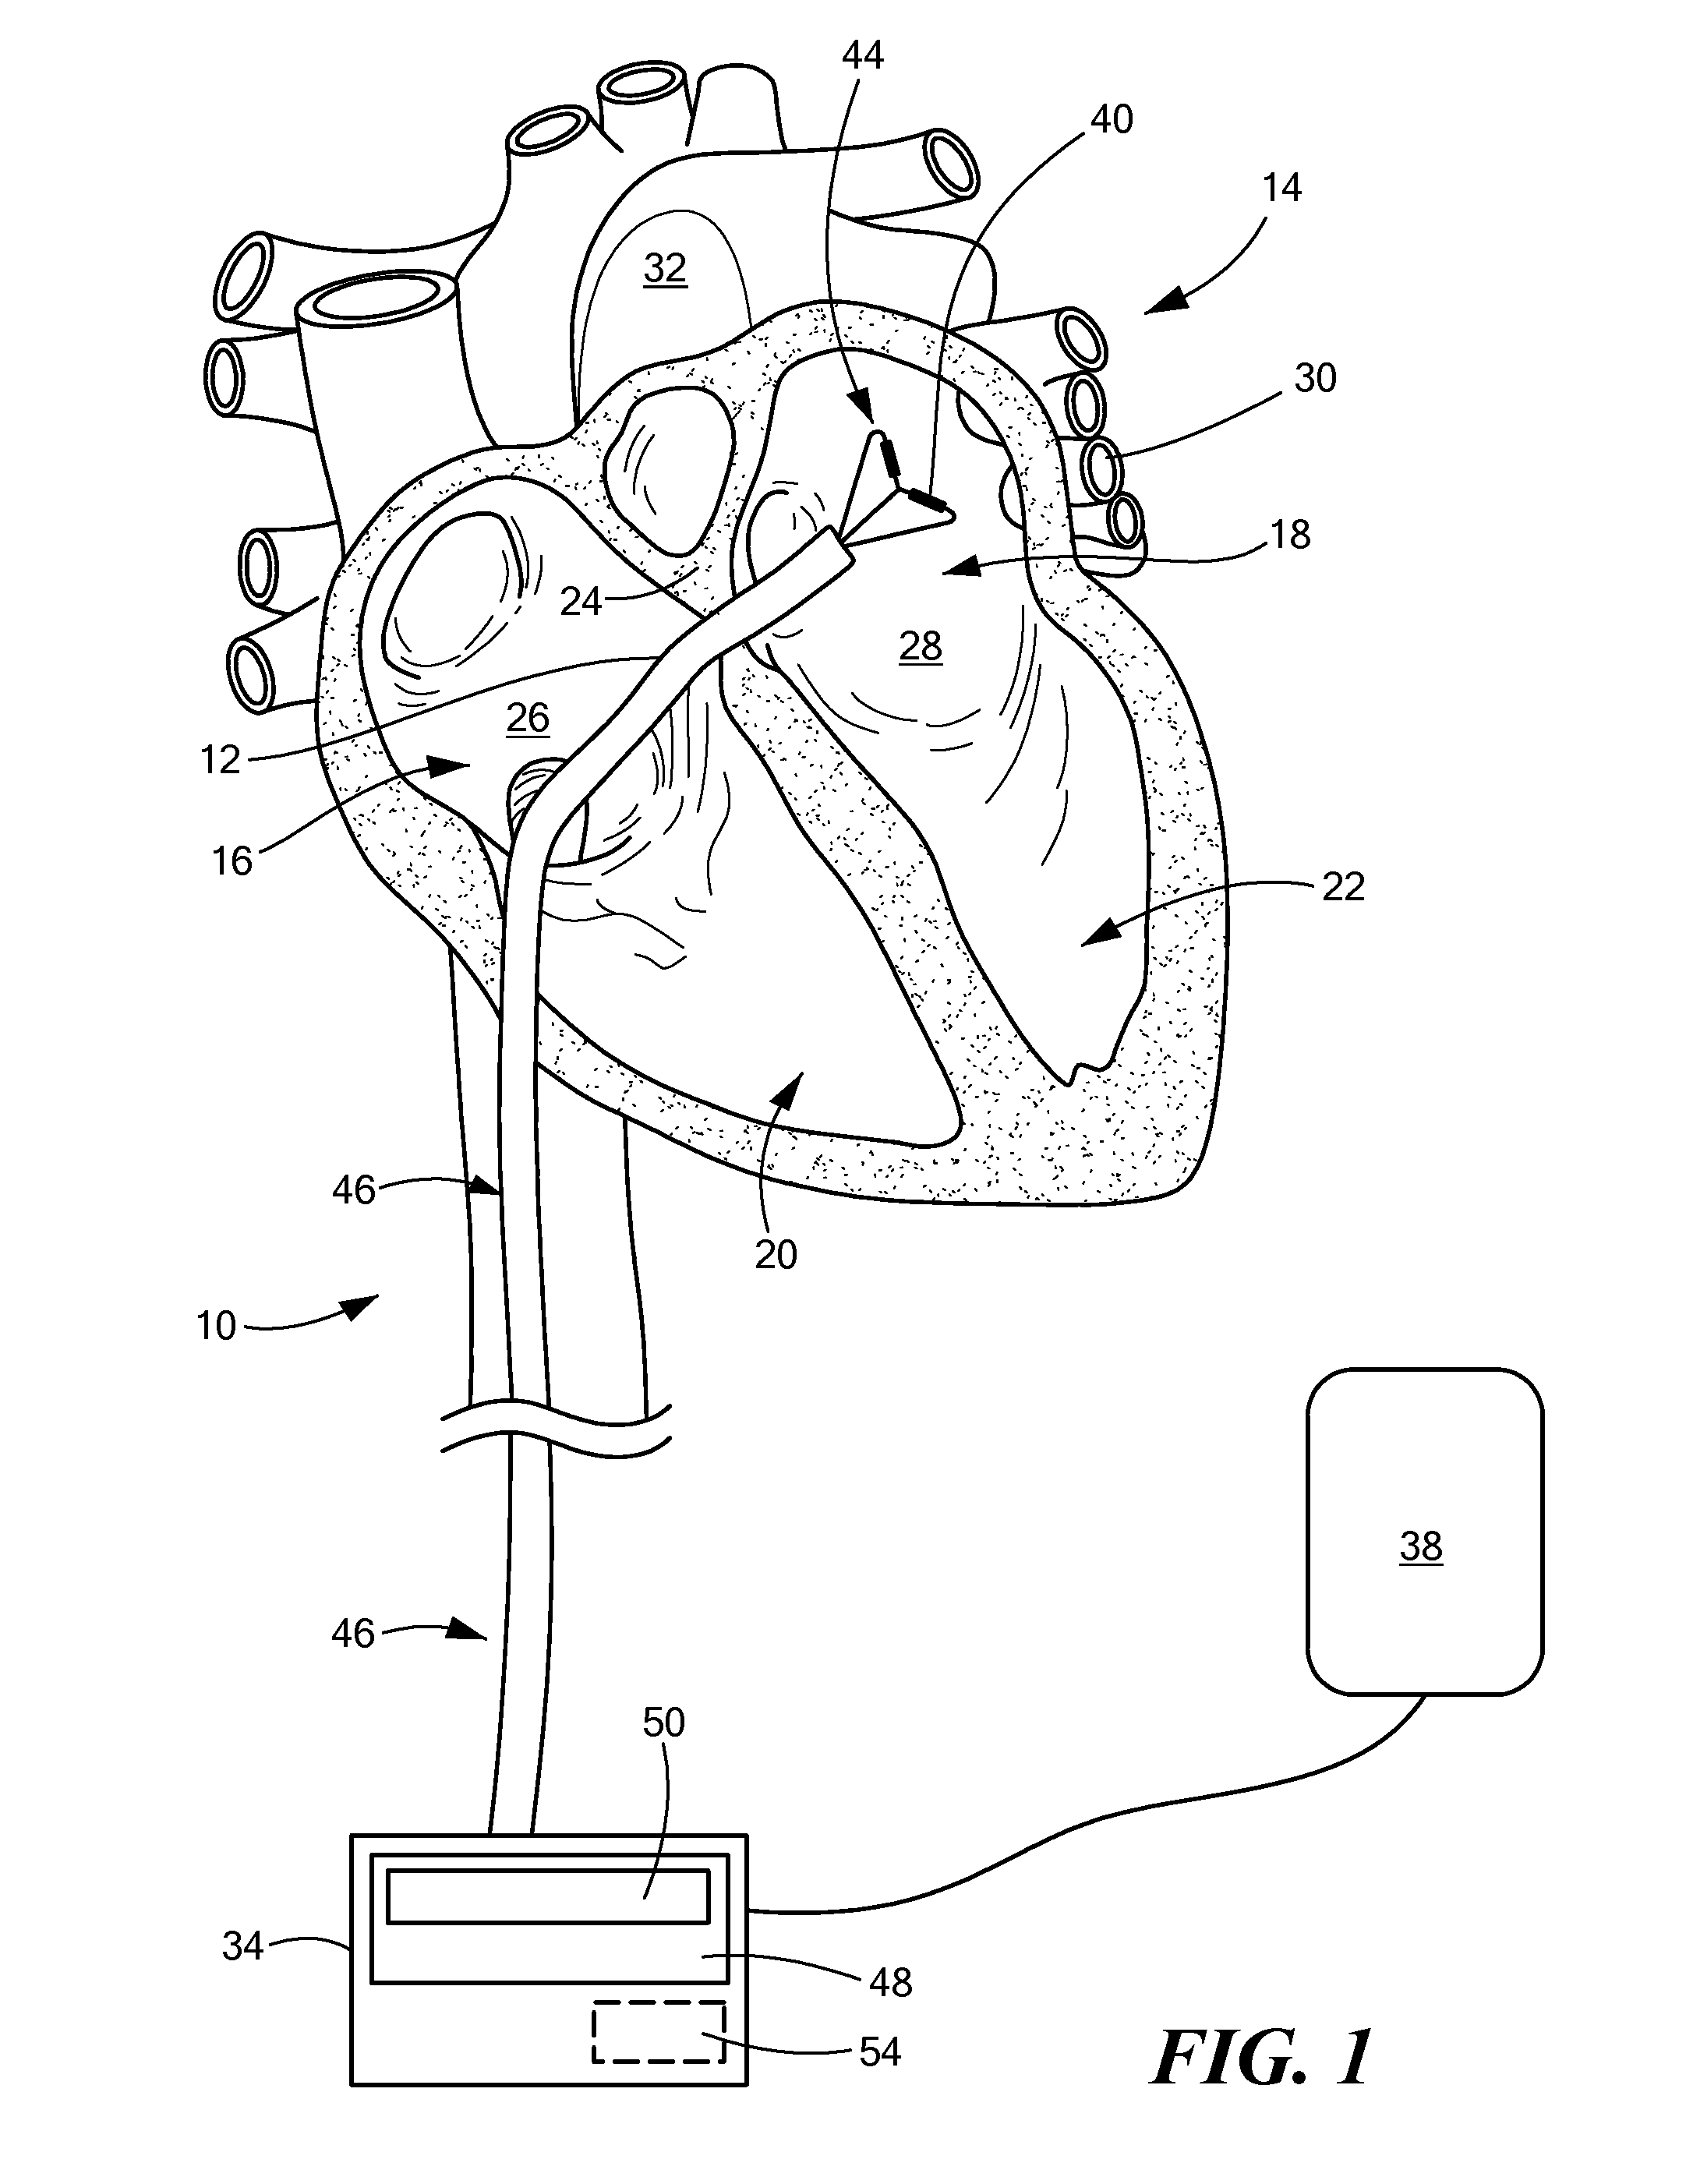 Controlled RF energy in a multi-electrode catheter